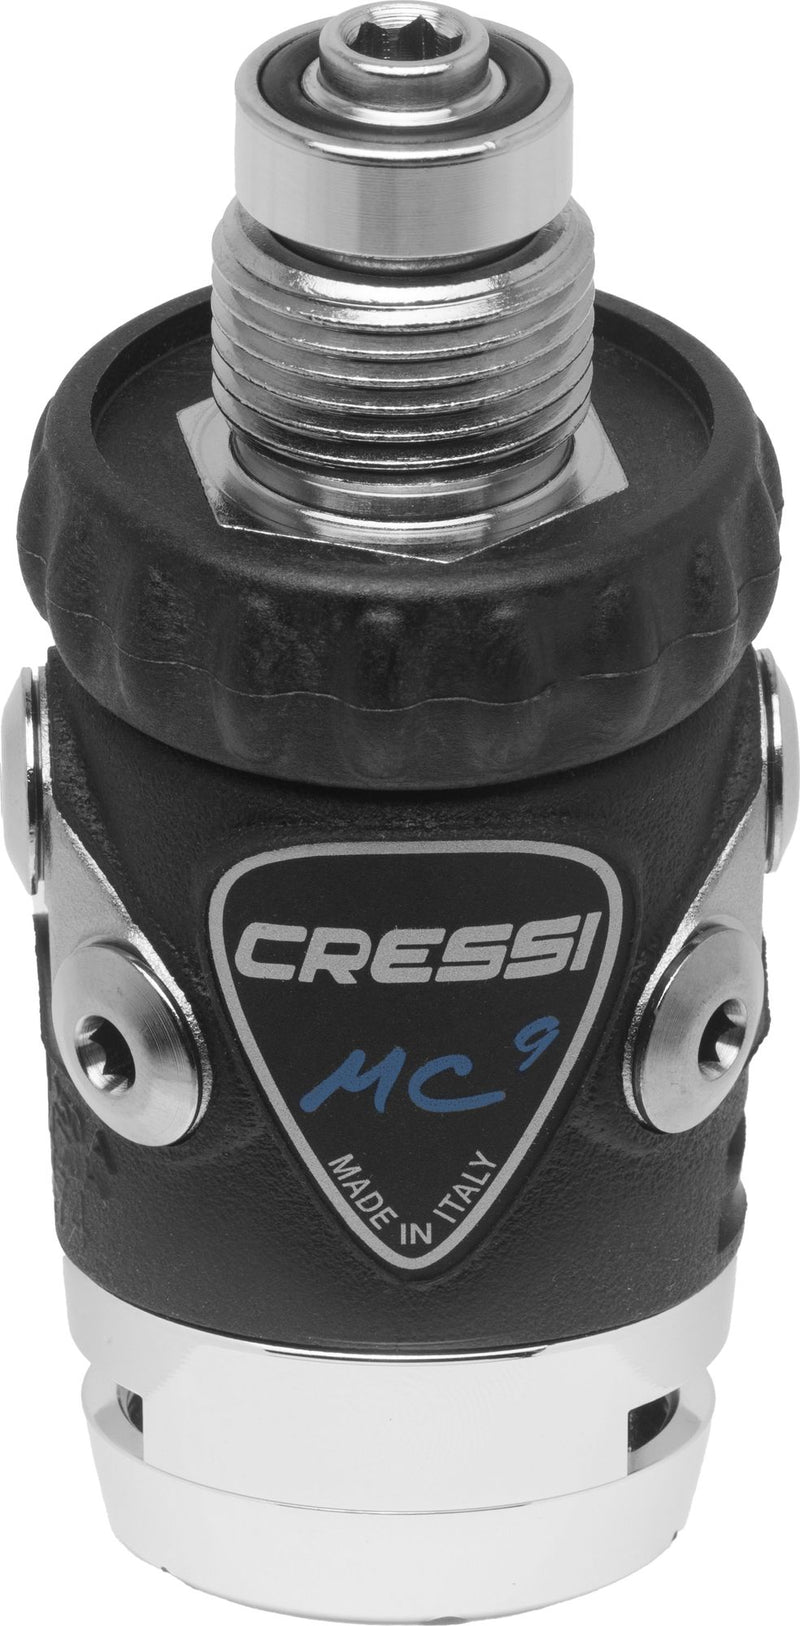 Cressi Mc9-Sc 1St Stage Only erogatore 1 ° stadio immersion subacque erogator scuba diving regulator 1st stage only